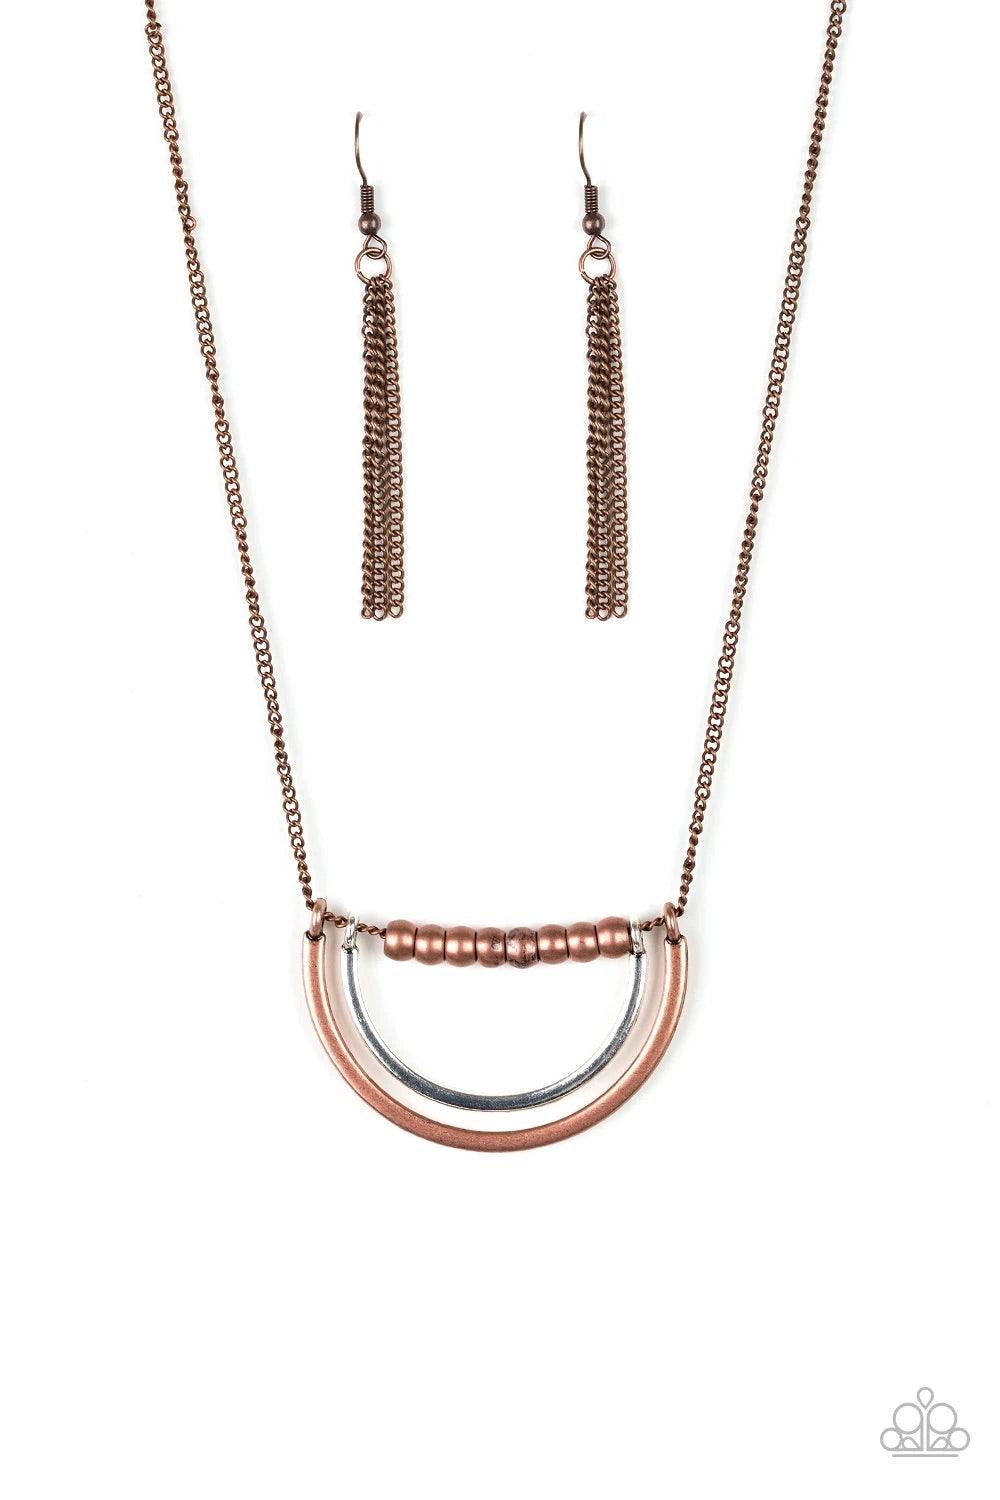 Paparazzi Accessories Artificial Arches - Copper A strand of shiny copper beads give way to bowing silver and copper frames, creating an edgy pendant below the collar. Features an adjustable clasp closure. Sold as one individual necklace. Includes one pai